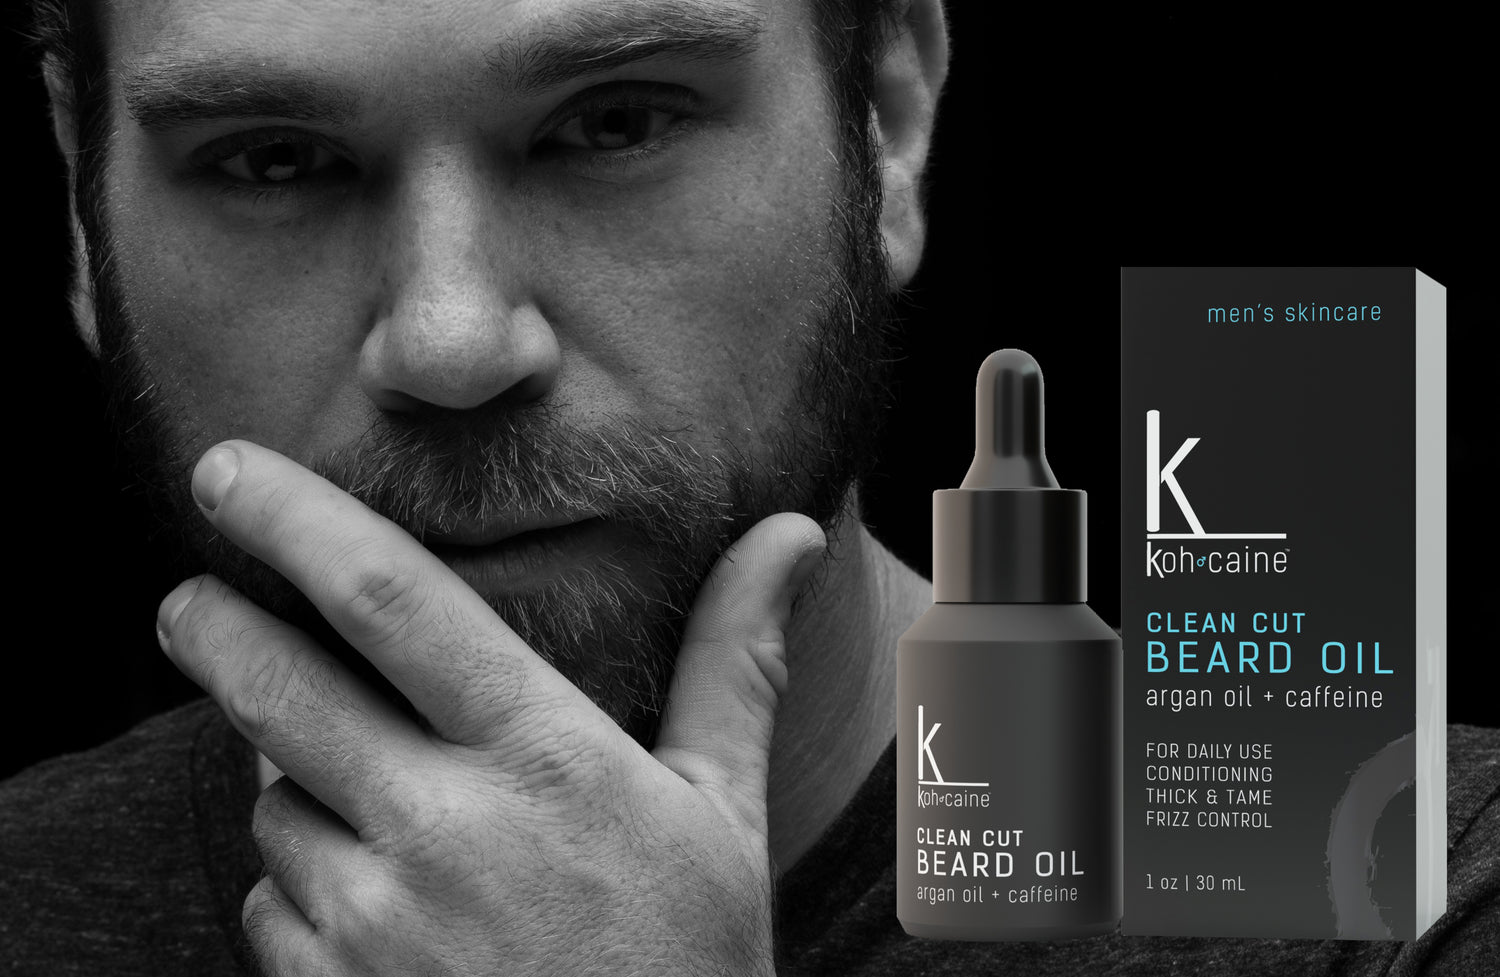 Shop Kohcaine Luxury Lifestyle, American-Made Men’s and Women's Apparel, Sunglasses, Skincare And Grooming Products Like Cleanser, Moisturizer, Beard Oil, Serum with Hyaluronic Acid & Eye Cream With Caffeine.